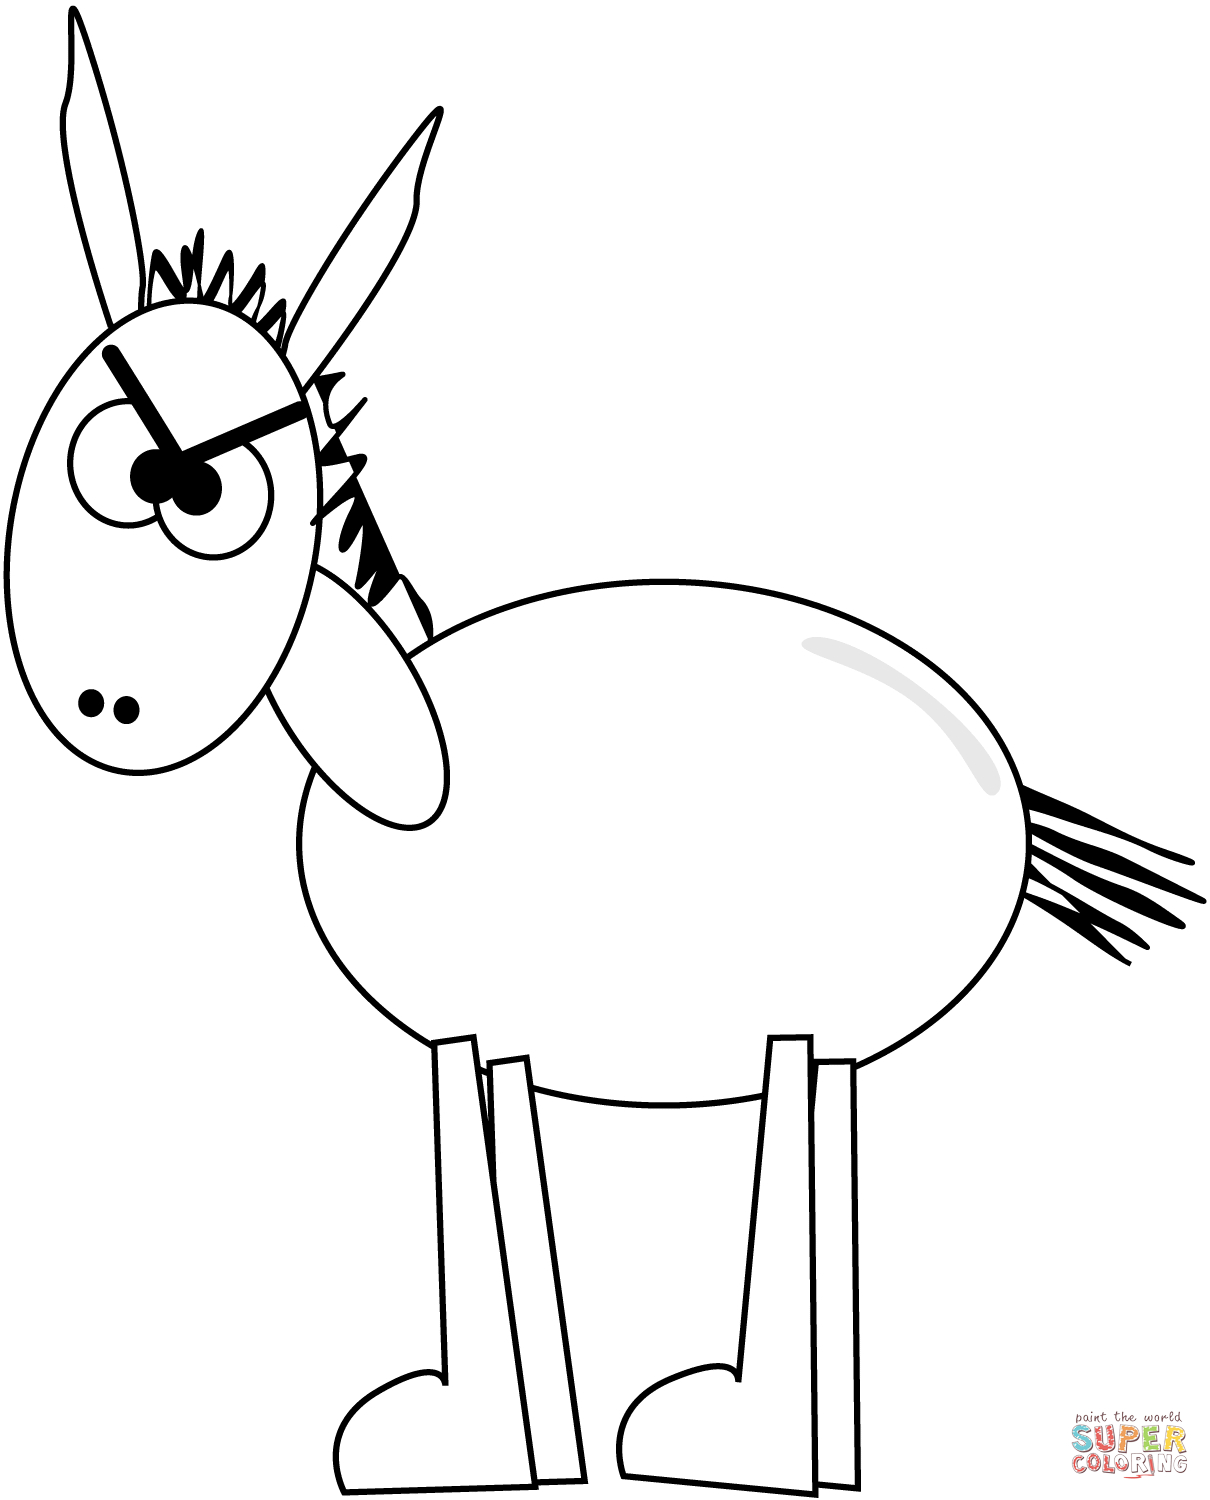 Donkey Coloring Page Donkeys Coloring Pages Free Coloring Pages